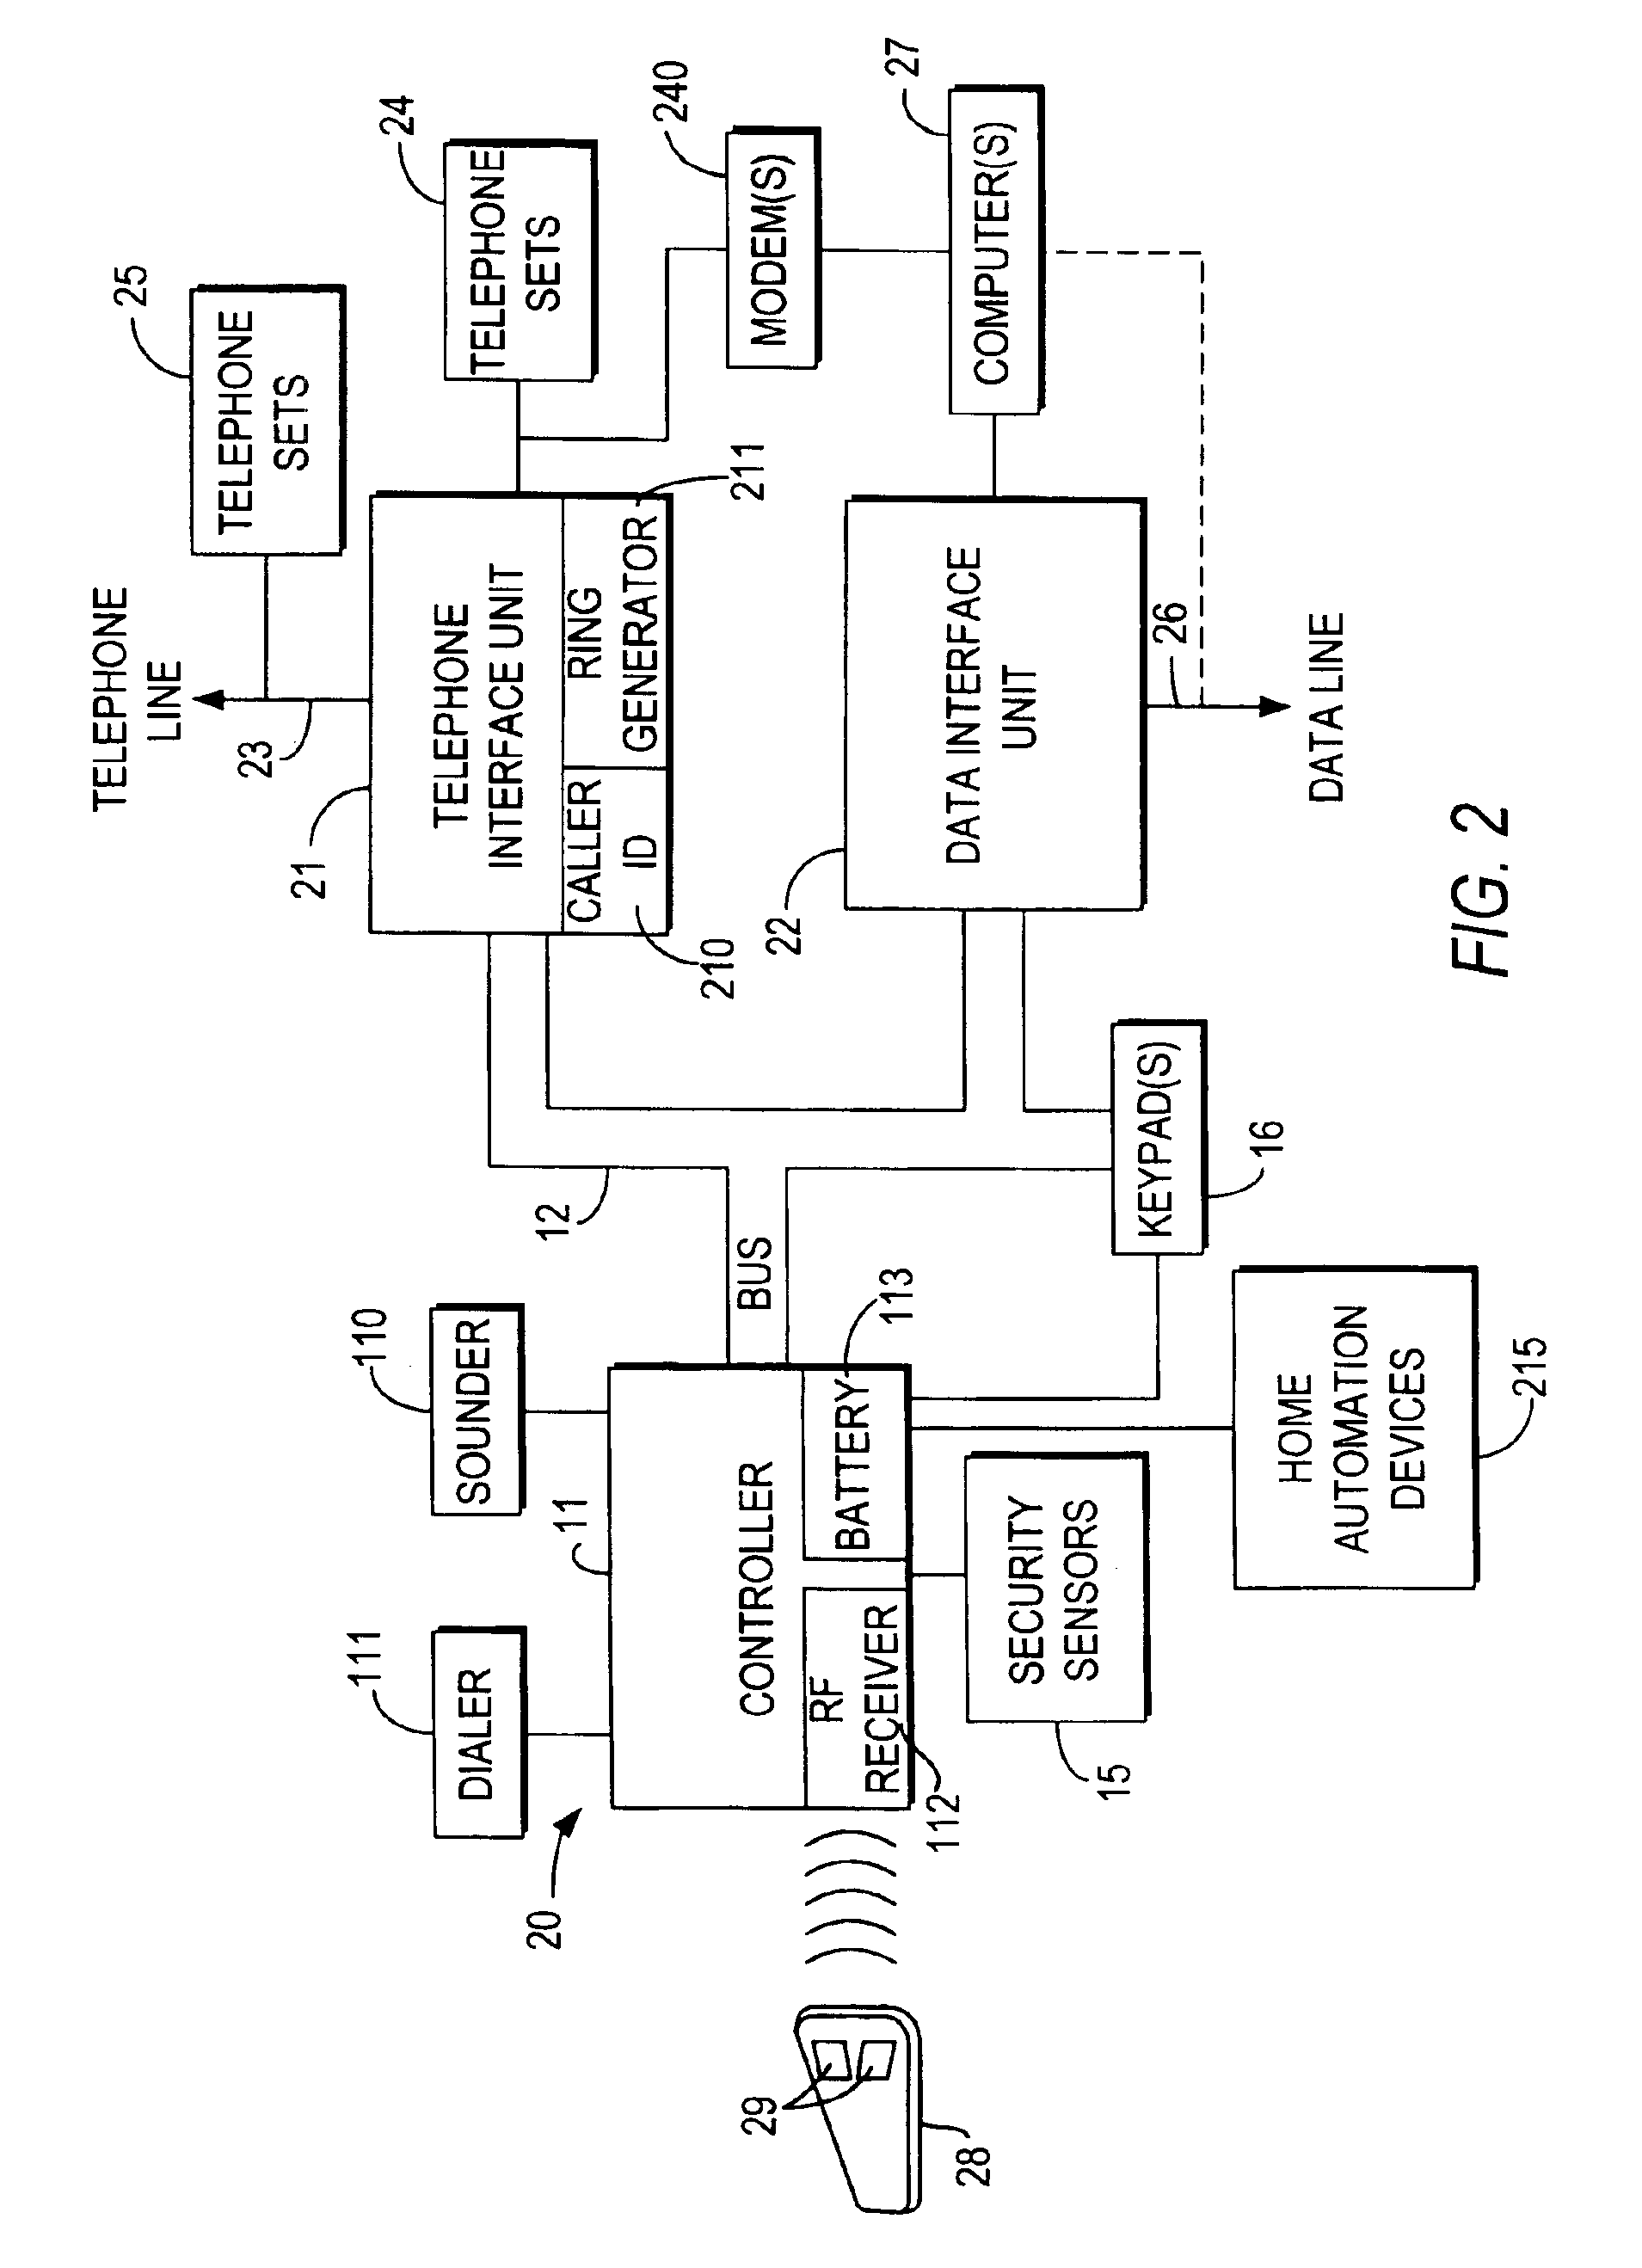 Integrated security and communications system with secure communications link